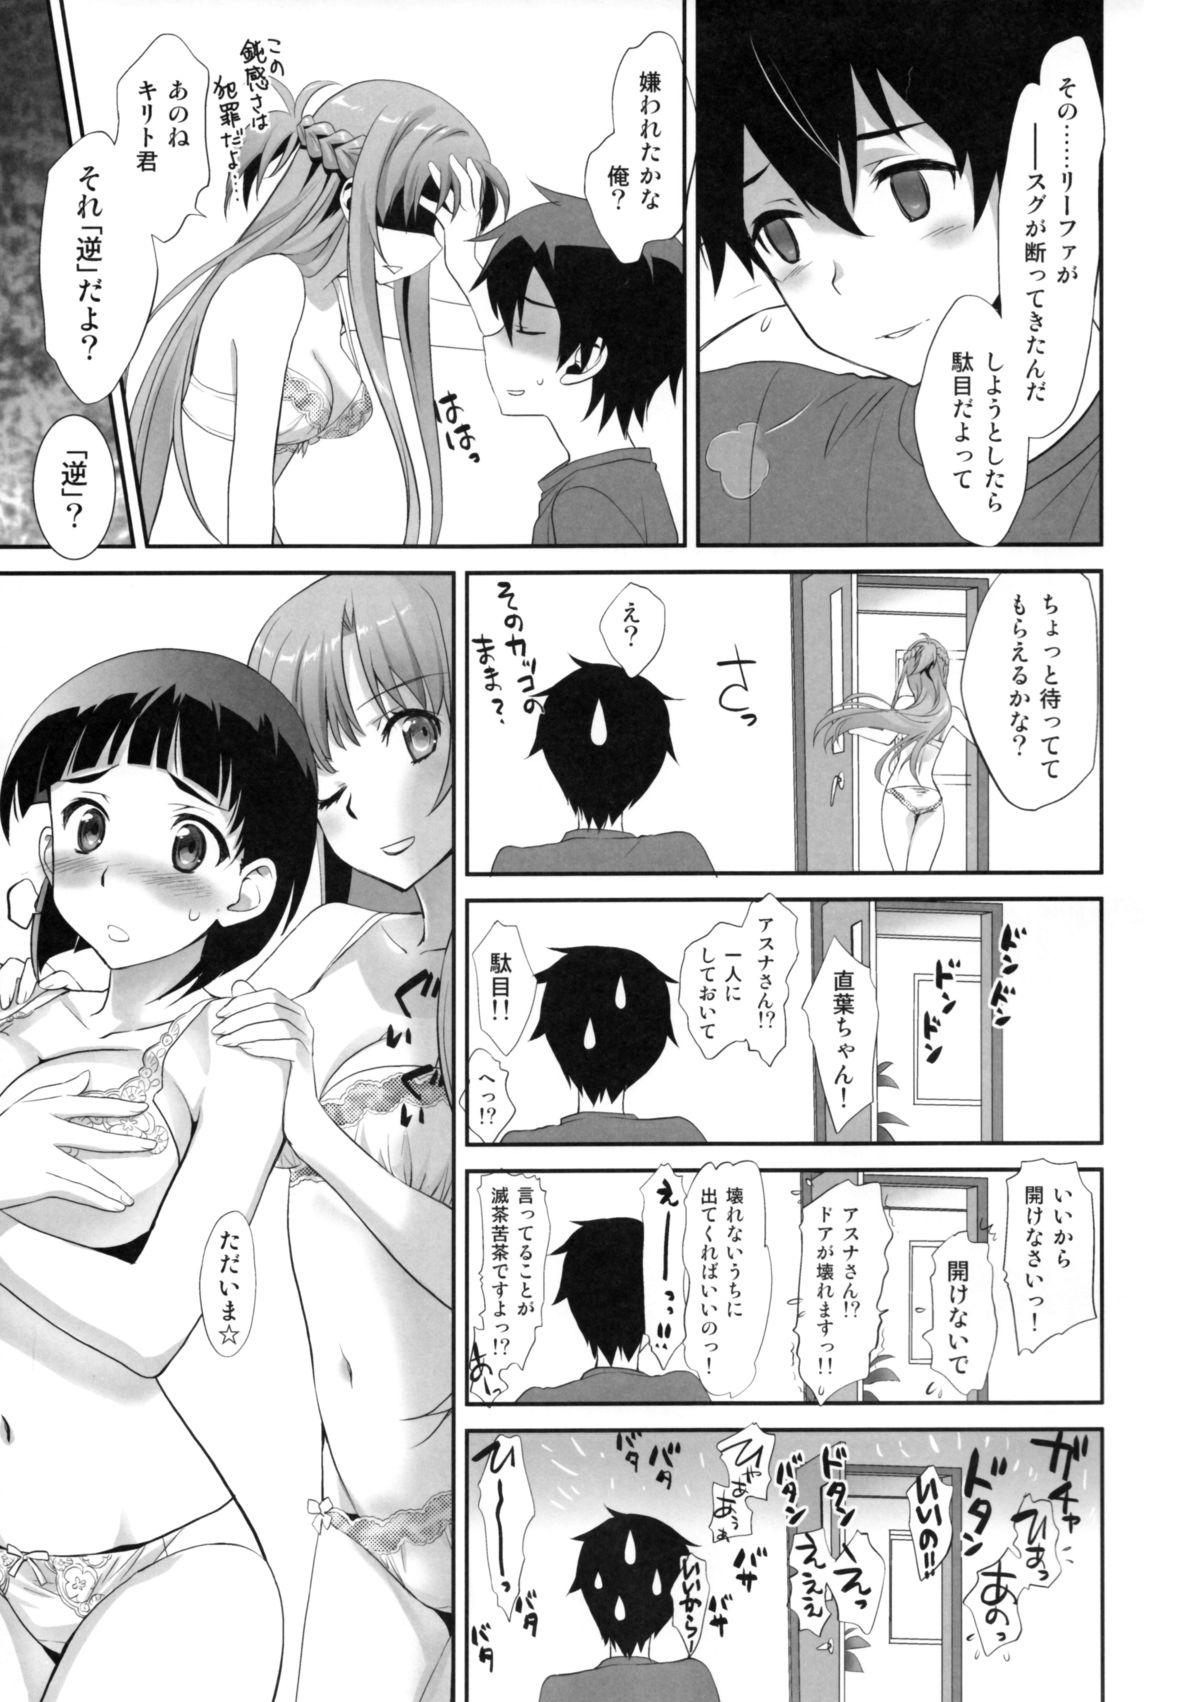 Milfsex Sunny-side up? - Sword art online Family Sex - Page 12